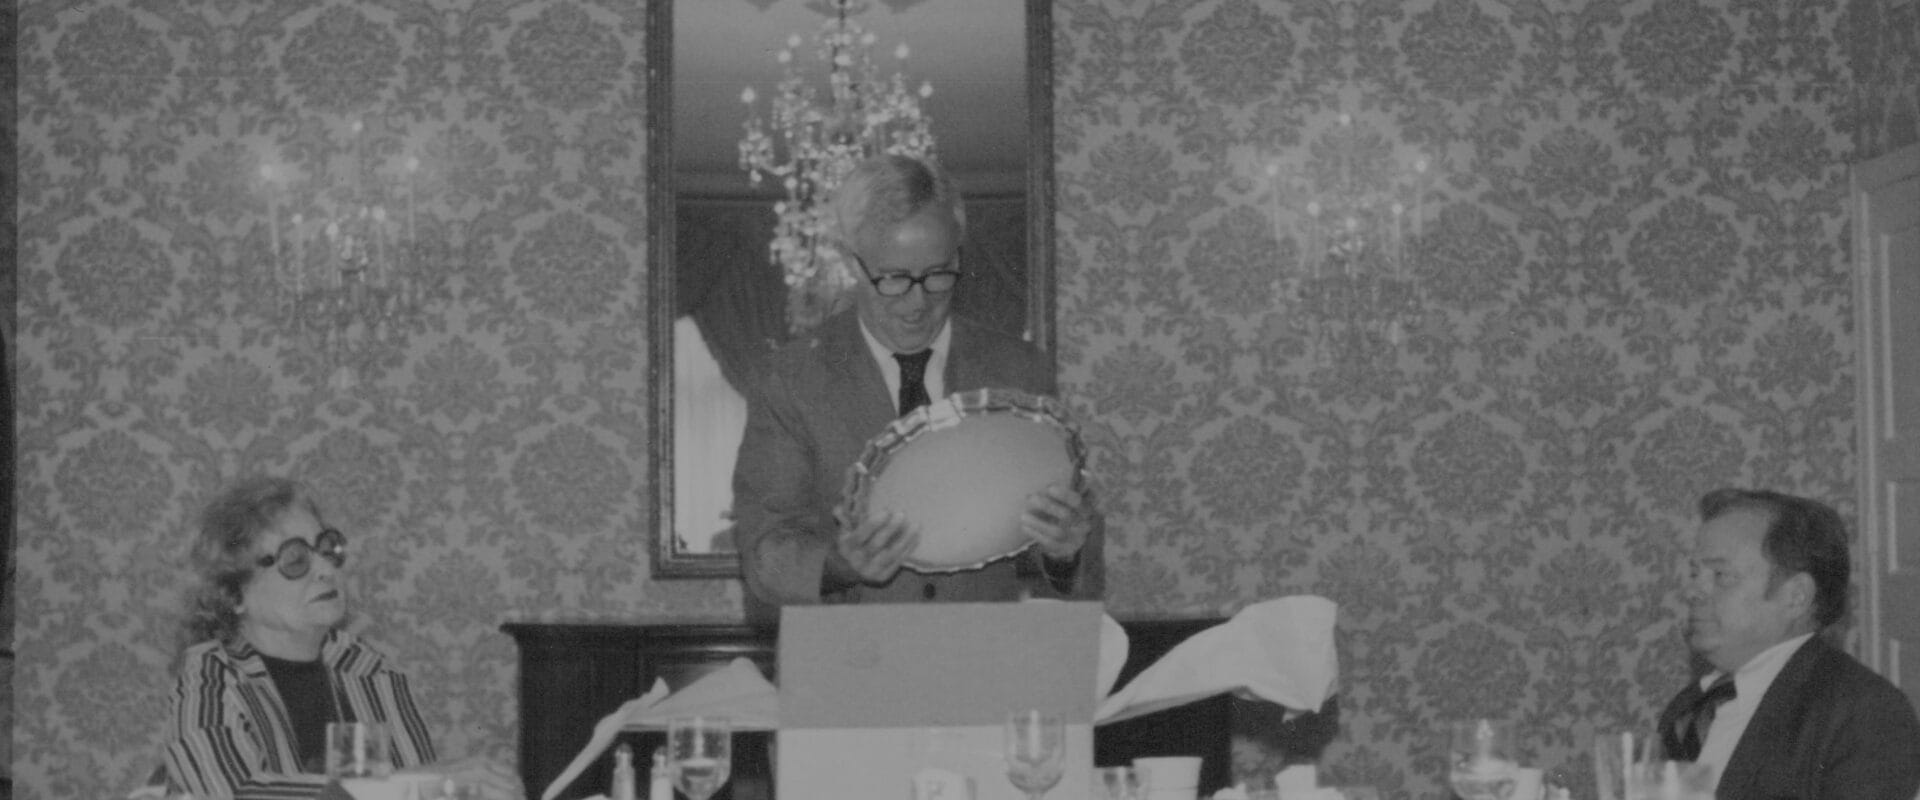 Former HWP owner is pictured center opening a gift at the head of the table. A woman is seated to the left and Howard W. Phillips Jr. is seated to the right.